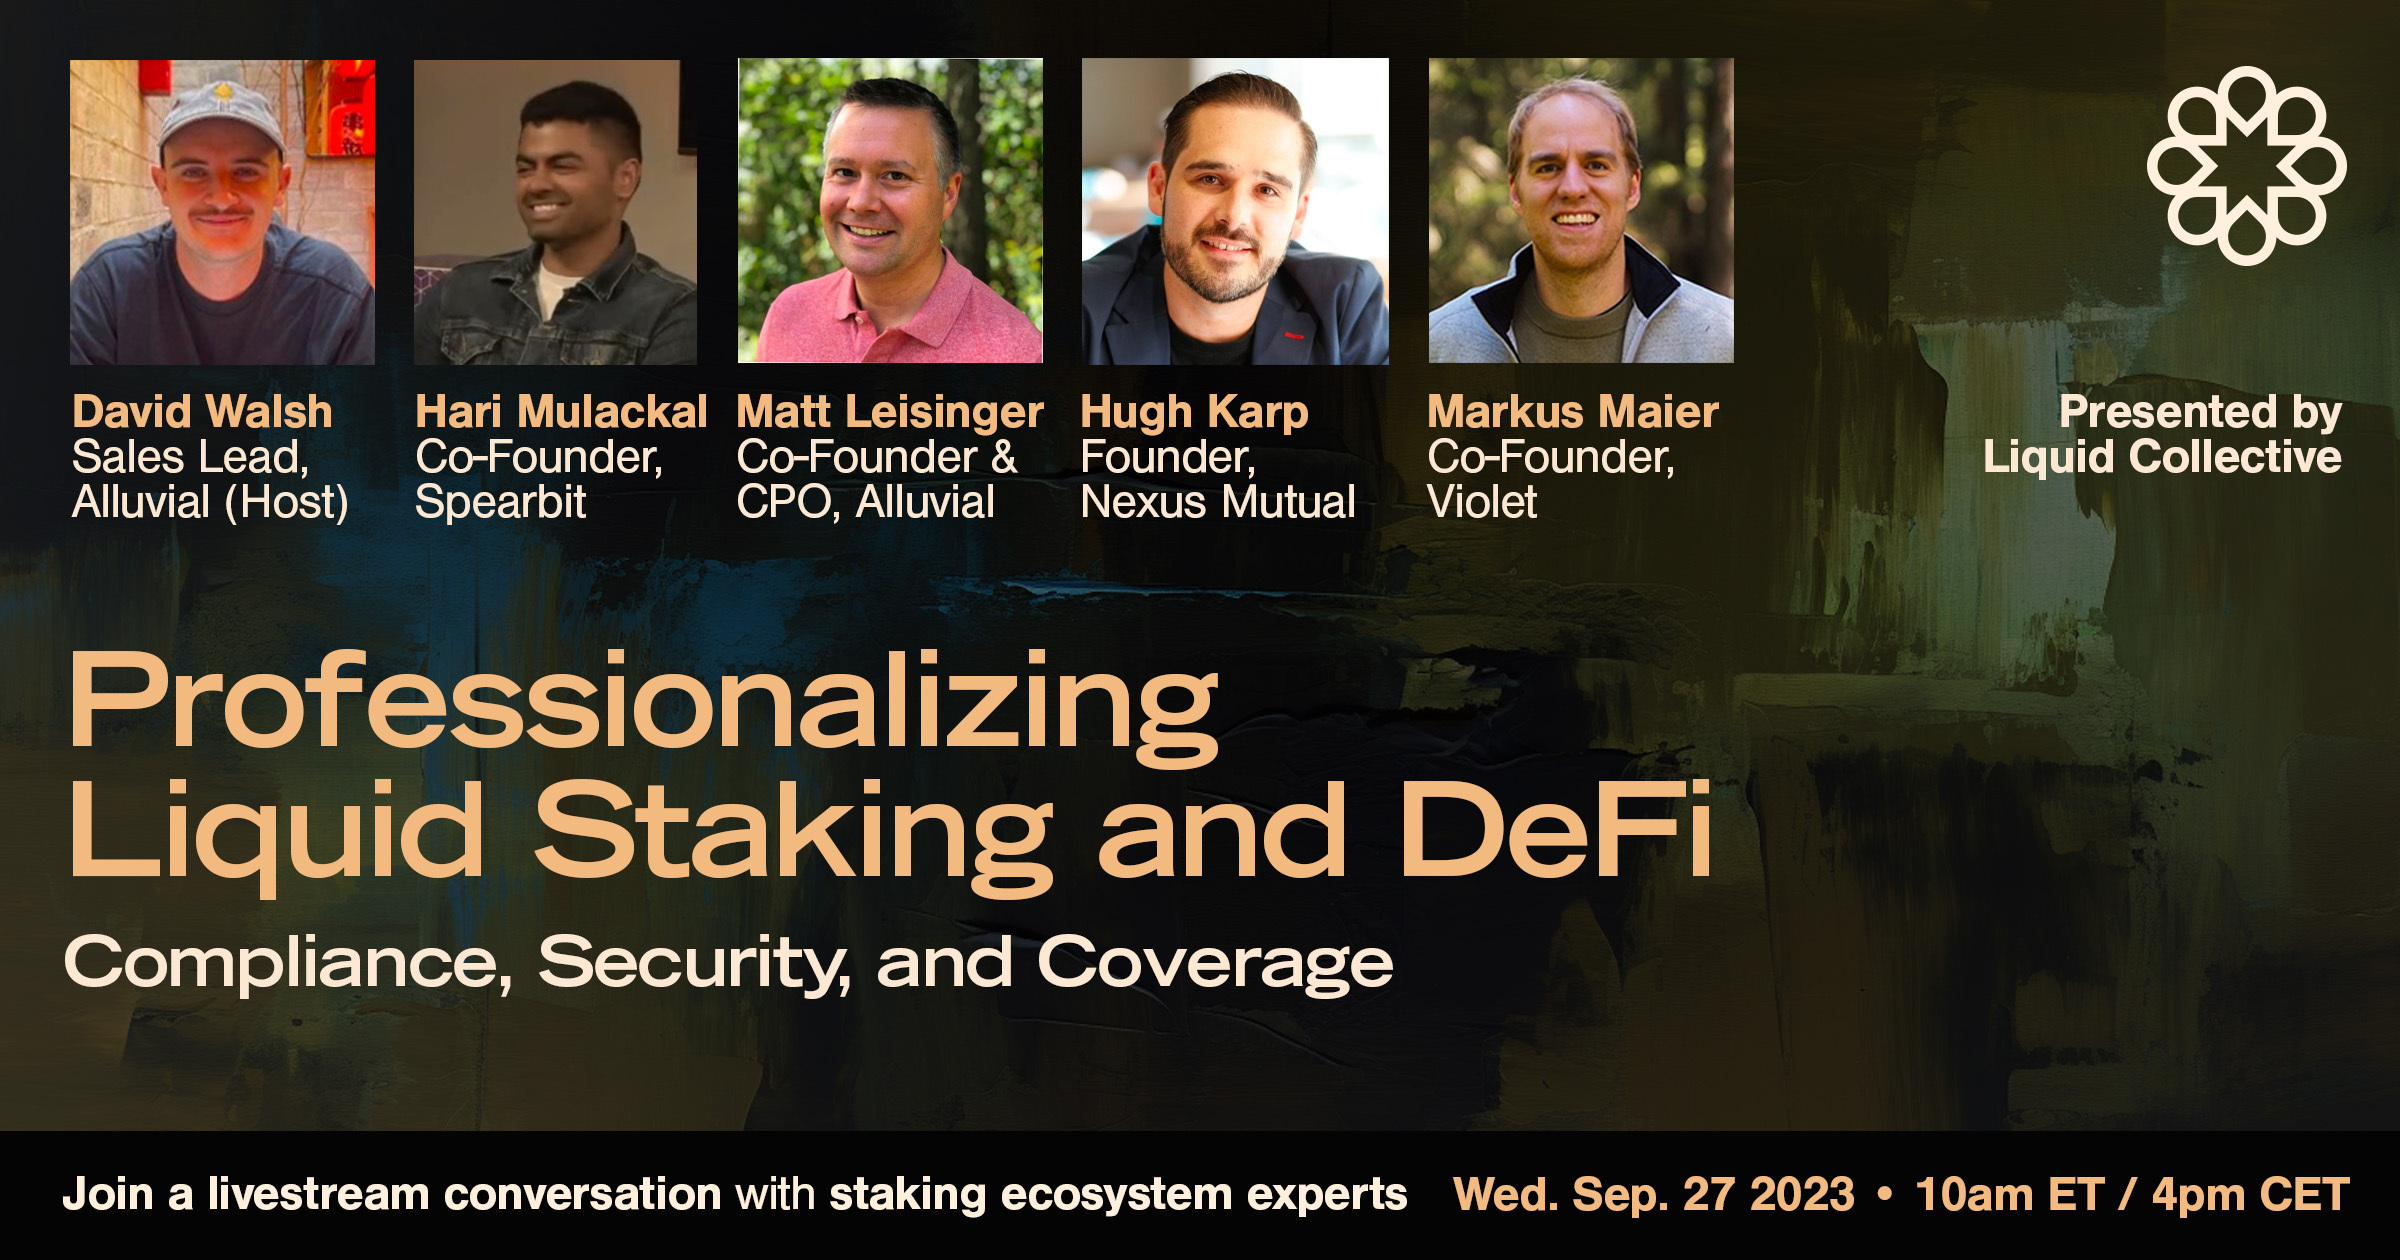 Upcoming Event: “Professionalizing Liquid Staking and DeFi: Compliance, Security, and Coverage”